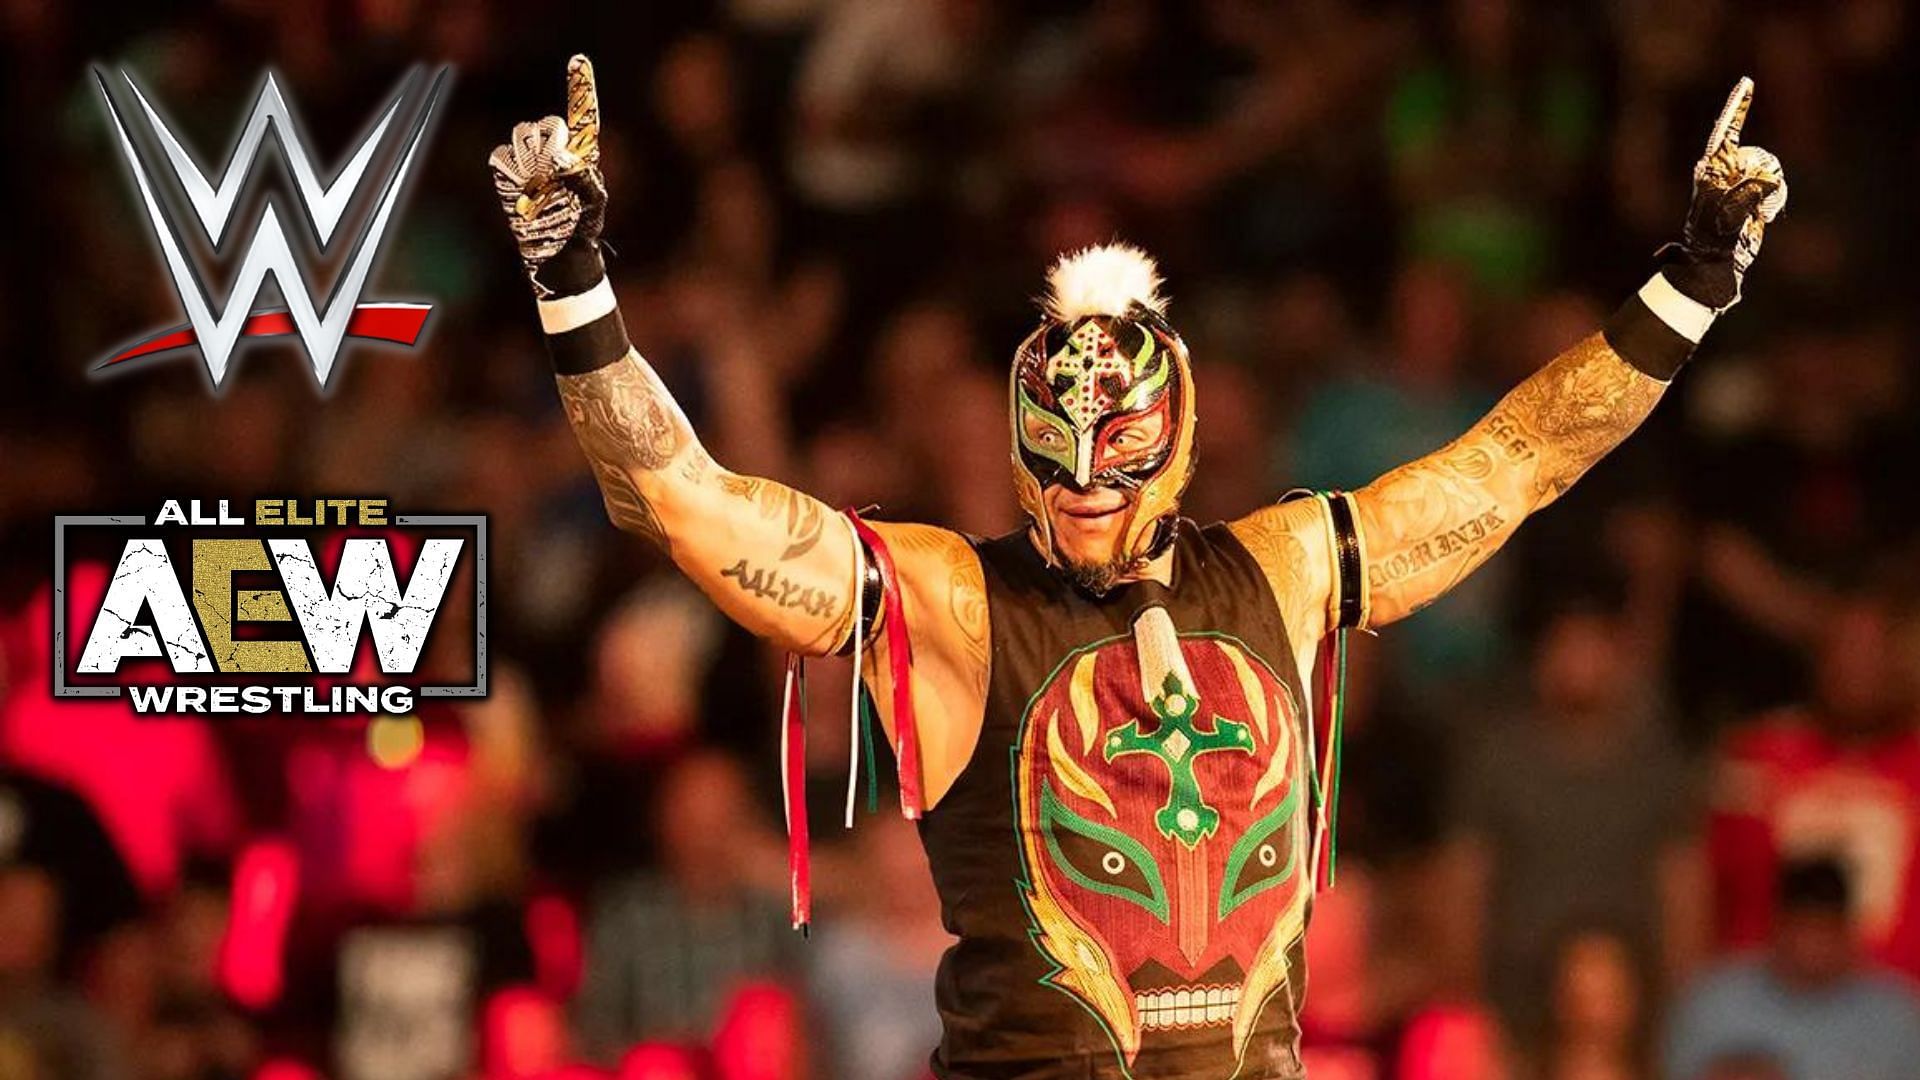 Rey Mysterio has established himself as one of the most recognizable names in pro-wrestling